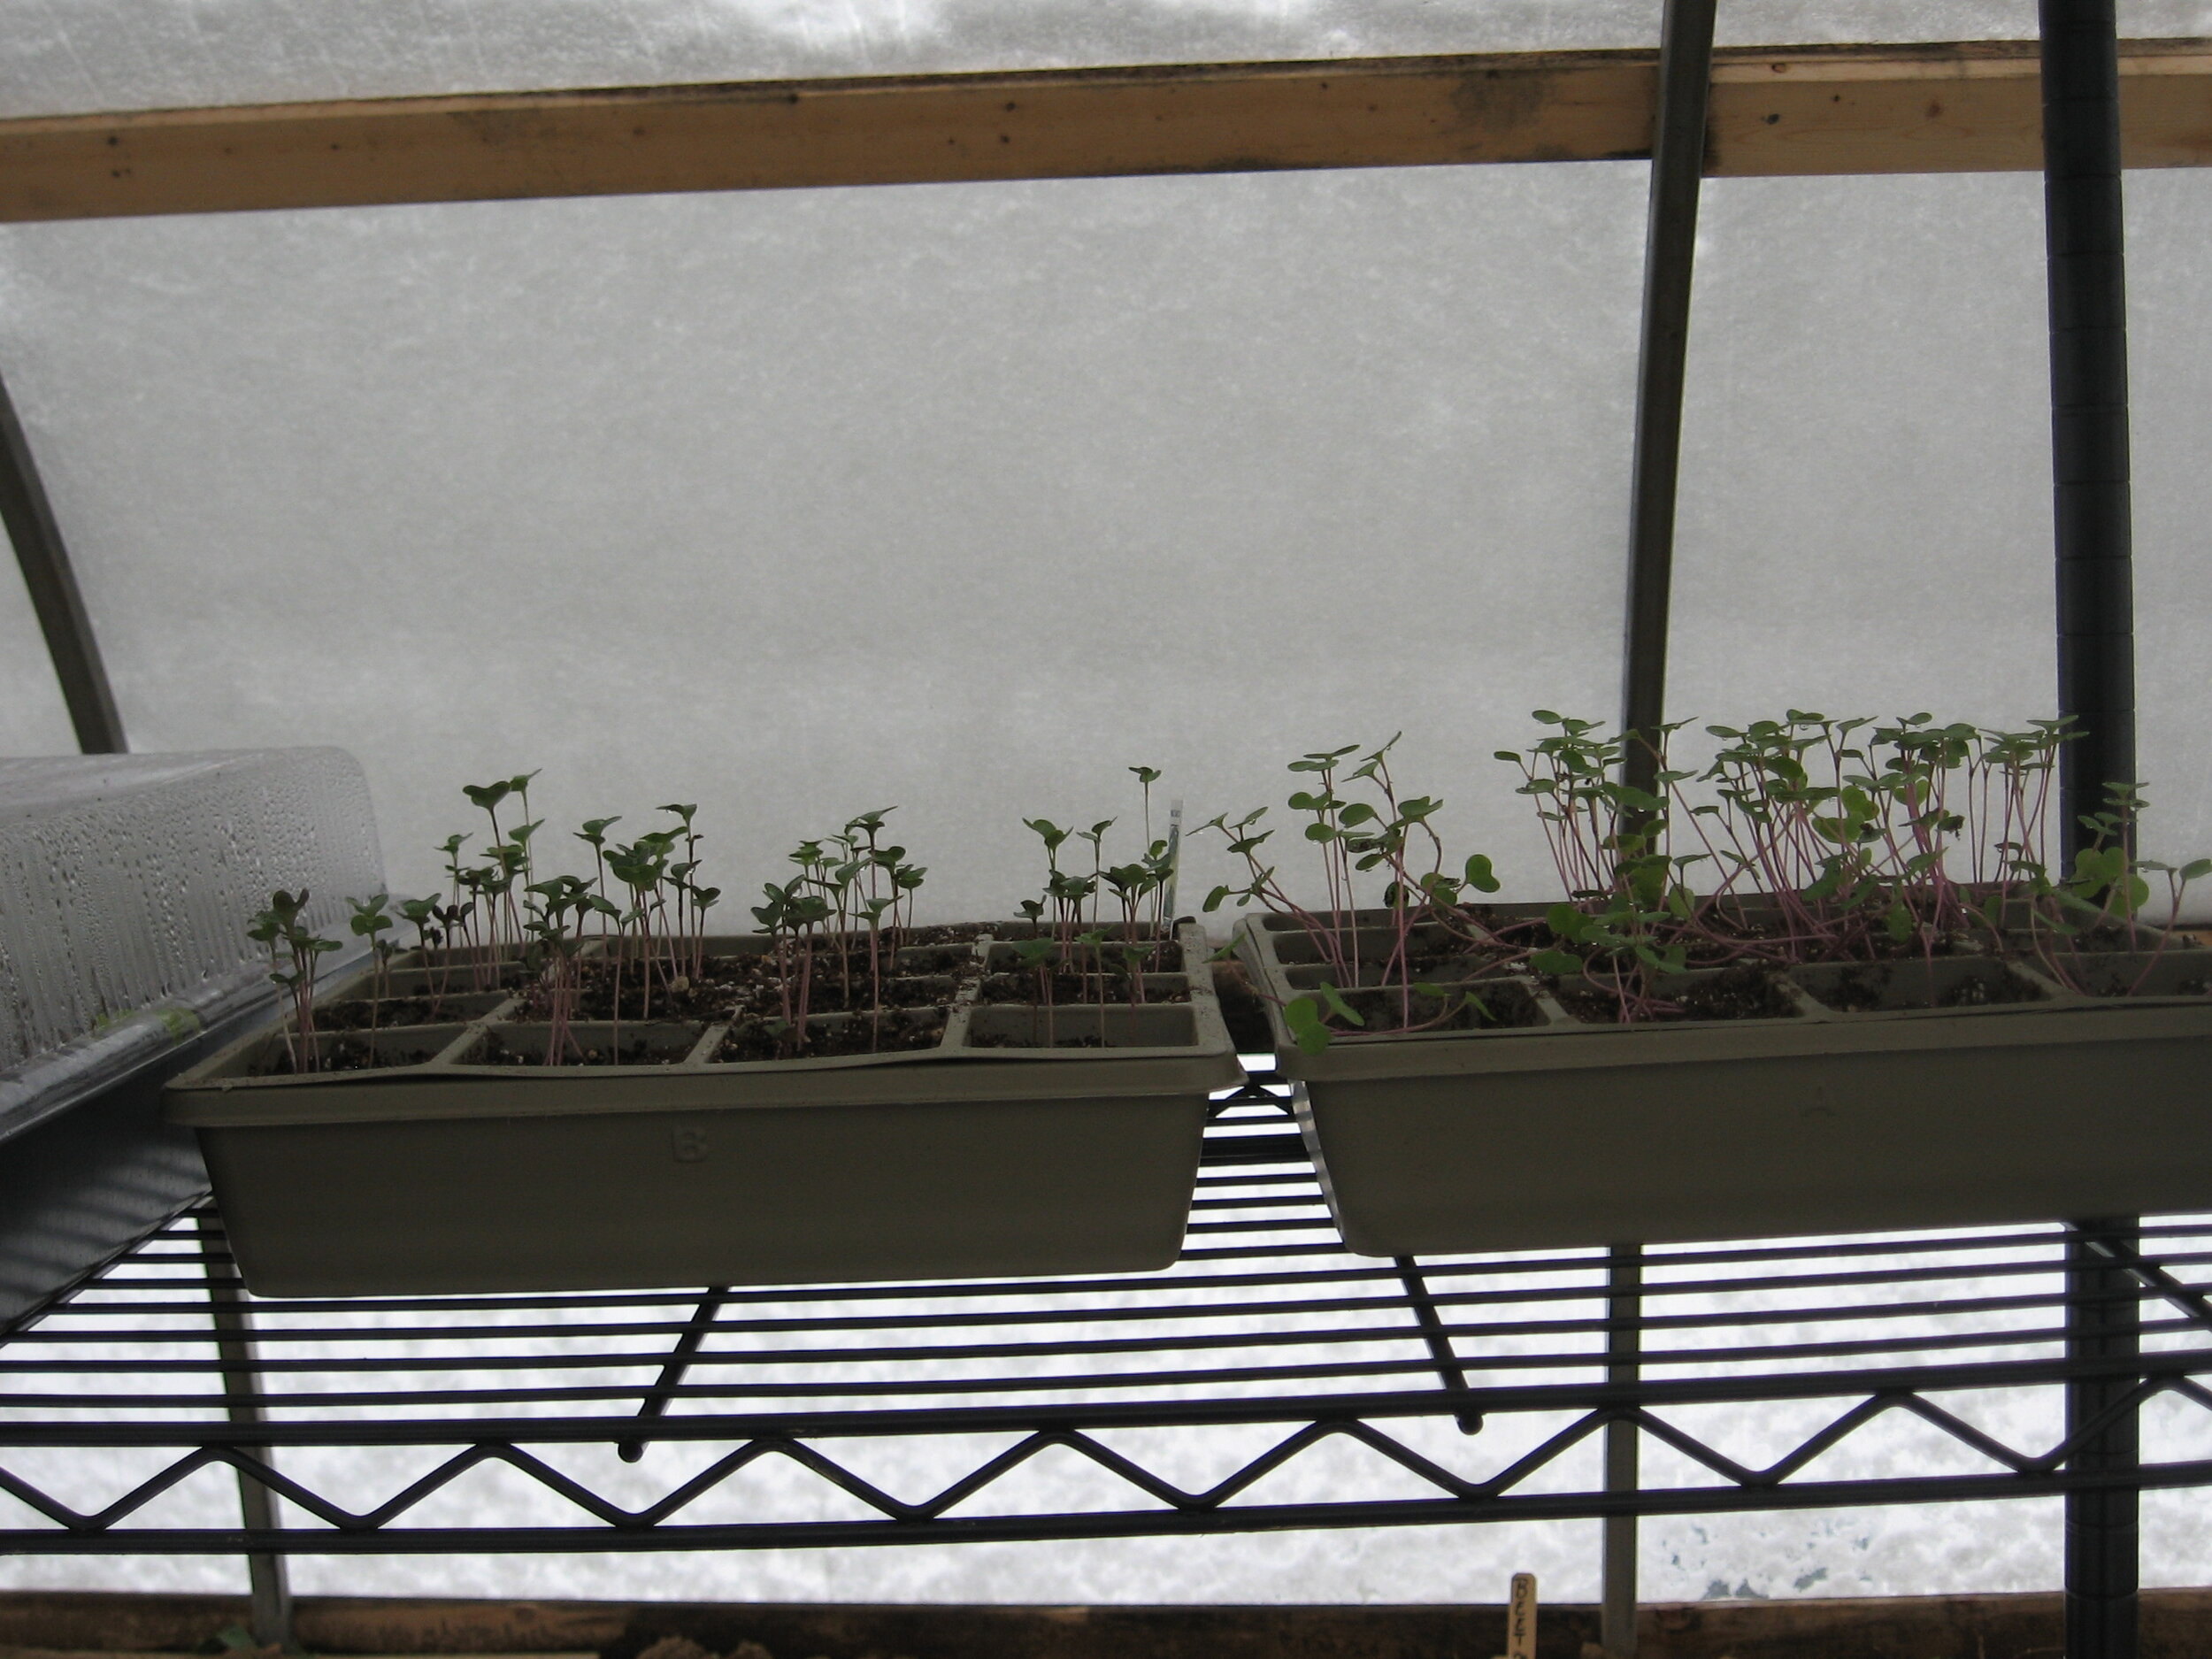 Brassica seedlings in my greenhouse during a late season snow.